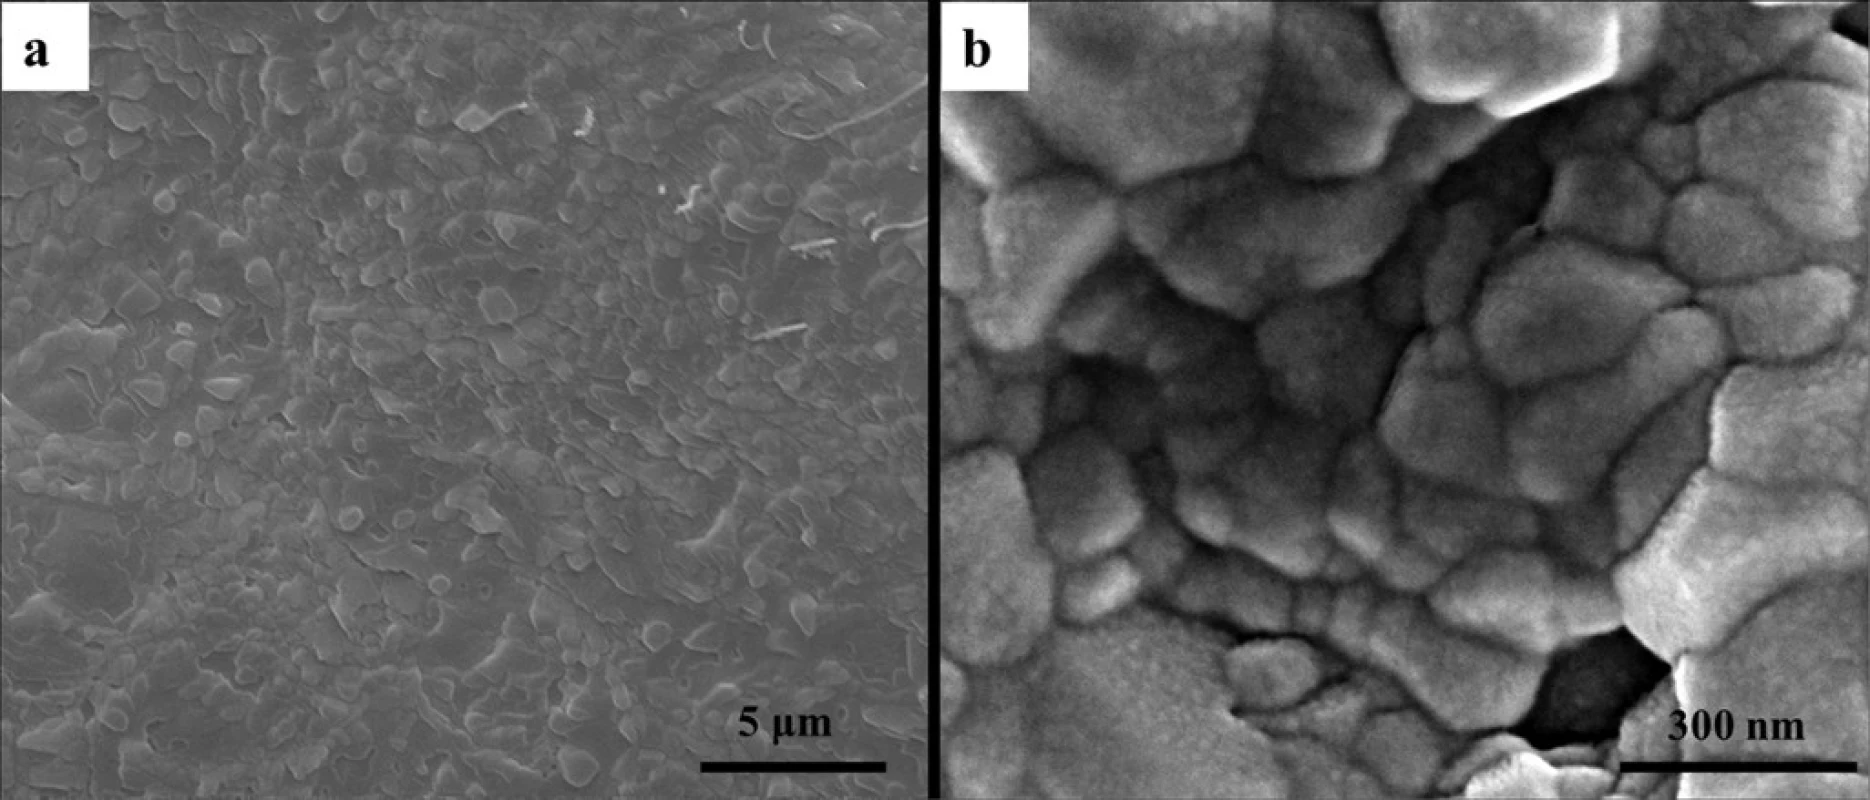 The surface morphology of scaffolds of CMC/ACP nanocomplexes characterized by SEM. (a), low magnification image showing irregular granuleson the sample surface; (b), high magnification image showing aggregation of nanoparticles on the granules.